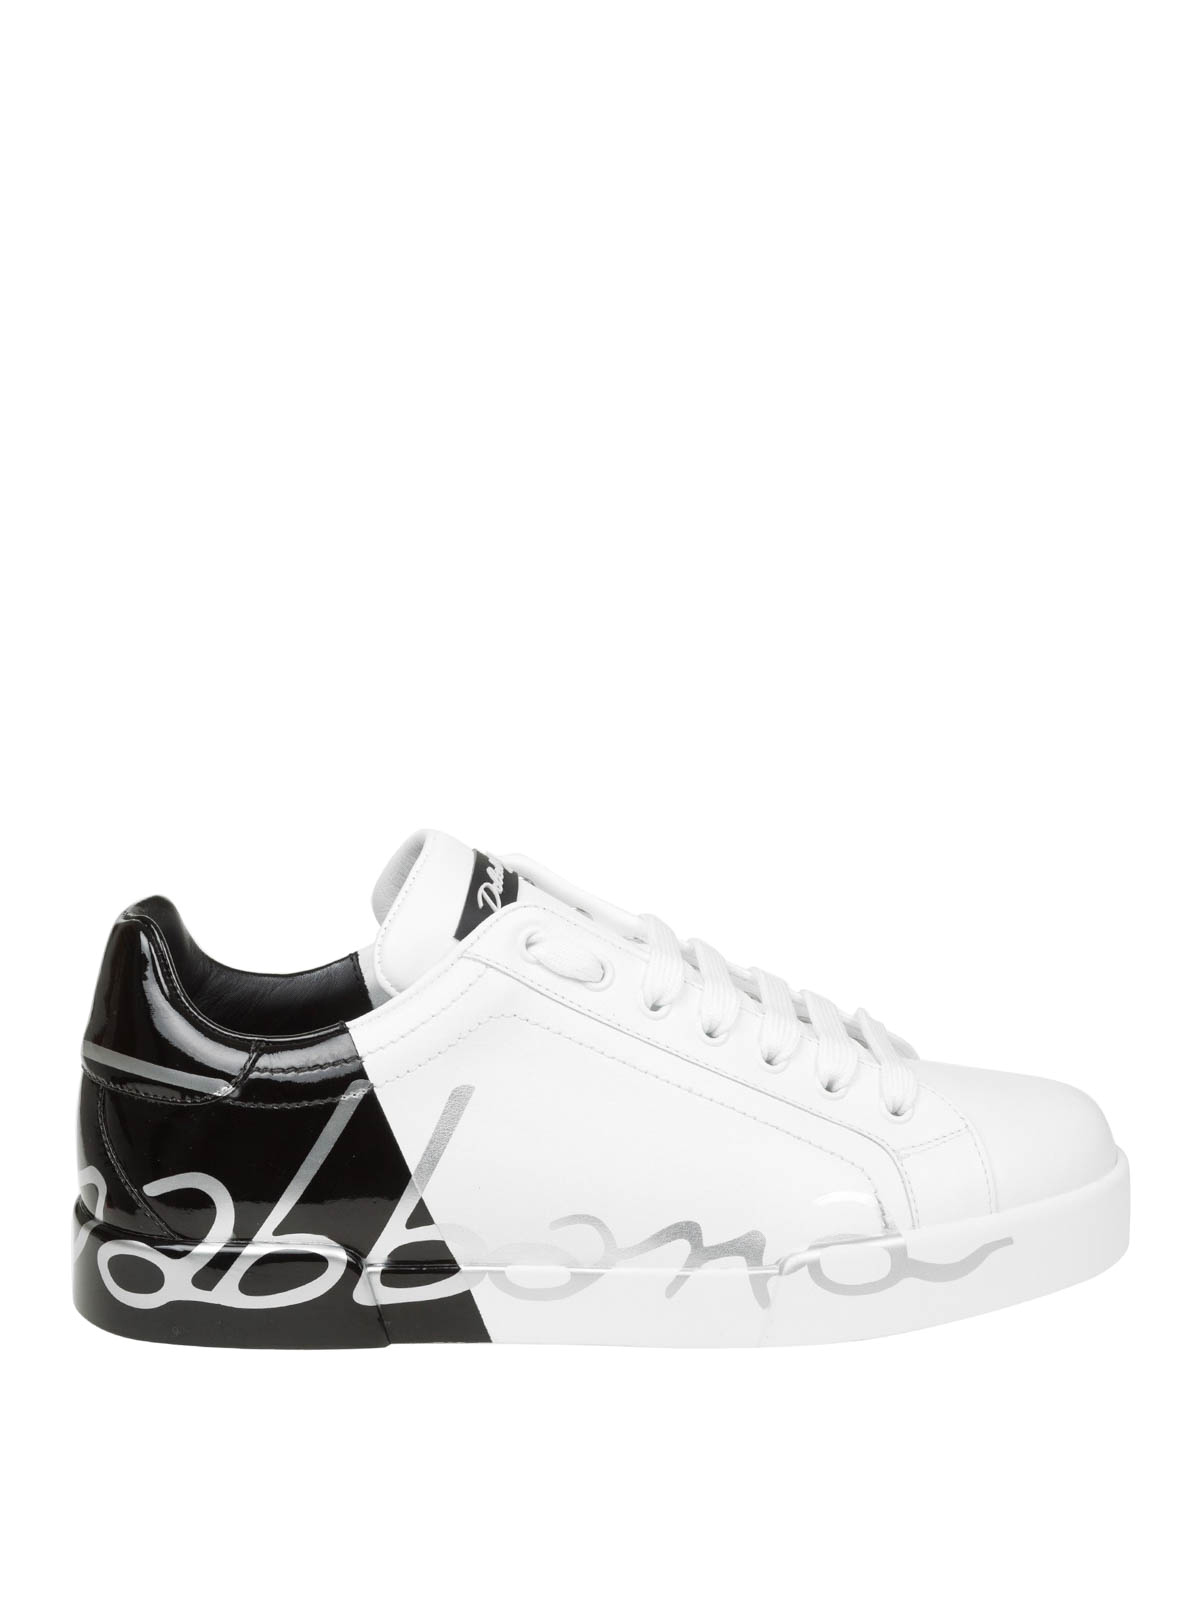 dolce gabbana leather sneakers